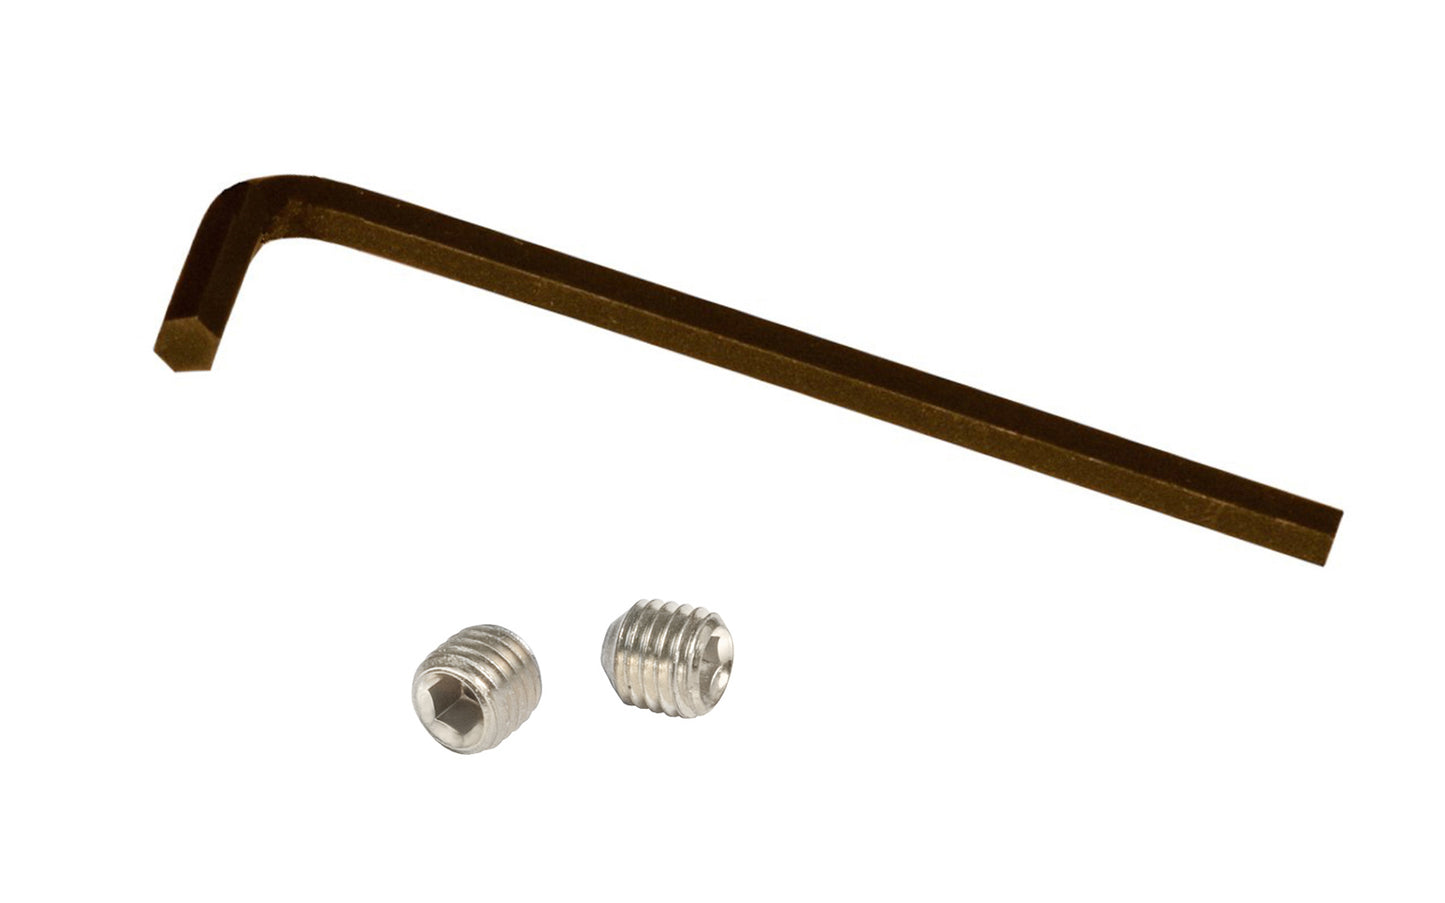 Pair of Set Screws & Hex Key for Doorknobs. The set screws work with traditional-style doorknobs that take threaded spindles. The thread size of the set screw is 32 TPI x 1/4" diameter size, which is a common thread size for holes on old-style doorknobs. Polished Nickel Finish.